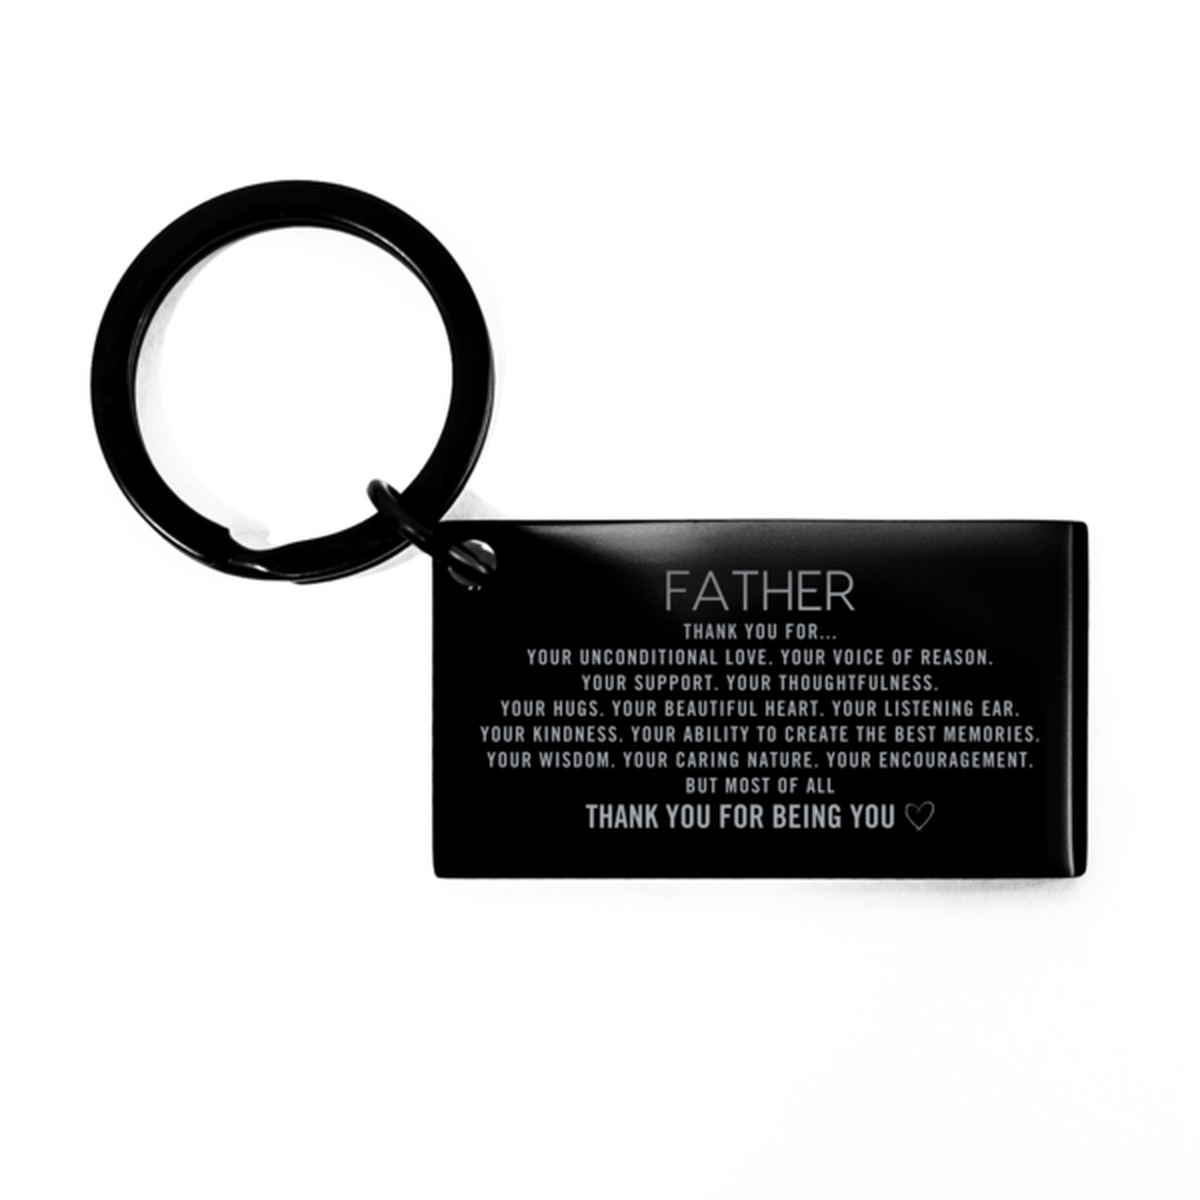 Father Keychain Custom, Engraved Gifts For Father Christmas Graduation Birthday Gifts for Men Women Father Thank you for Your unconditional love